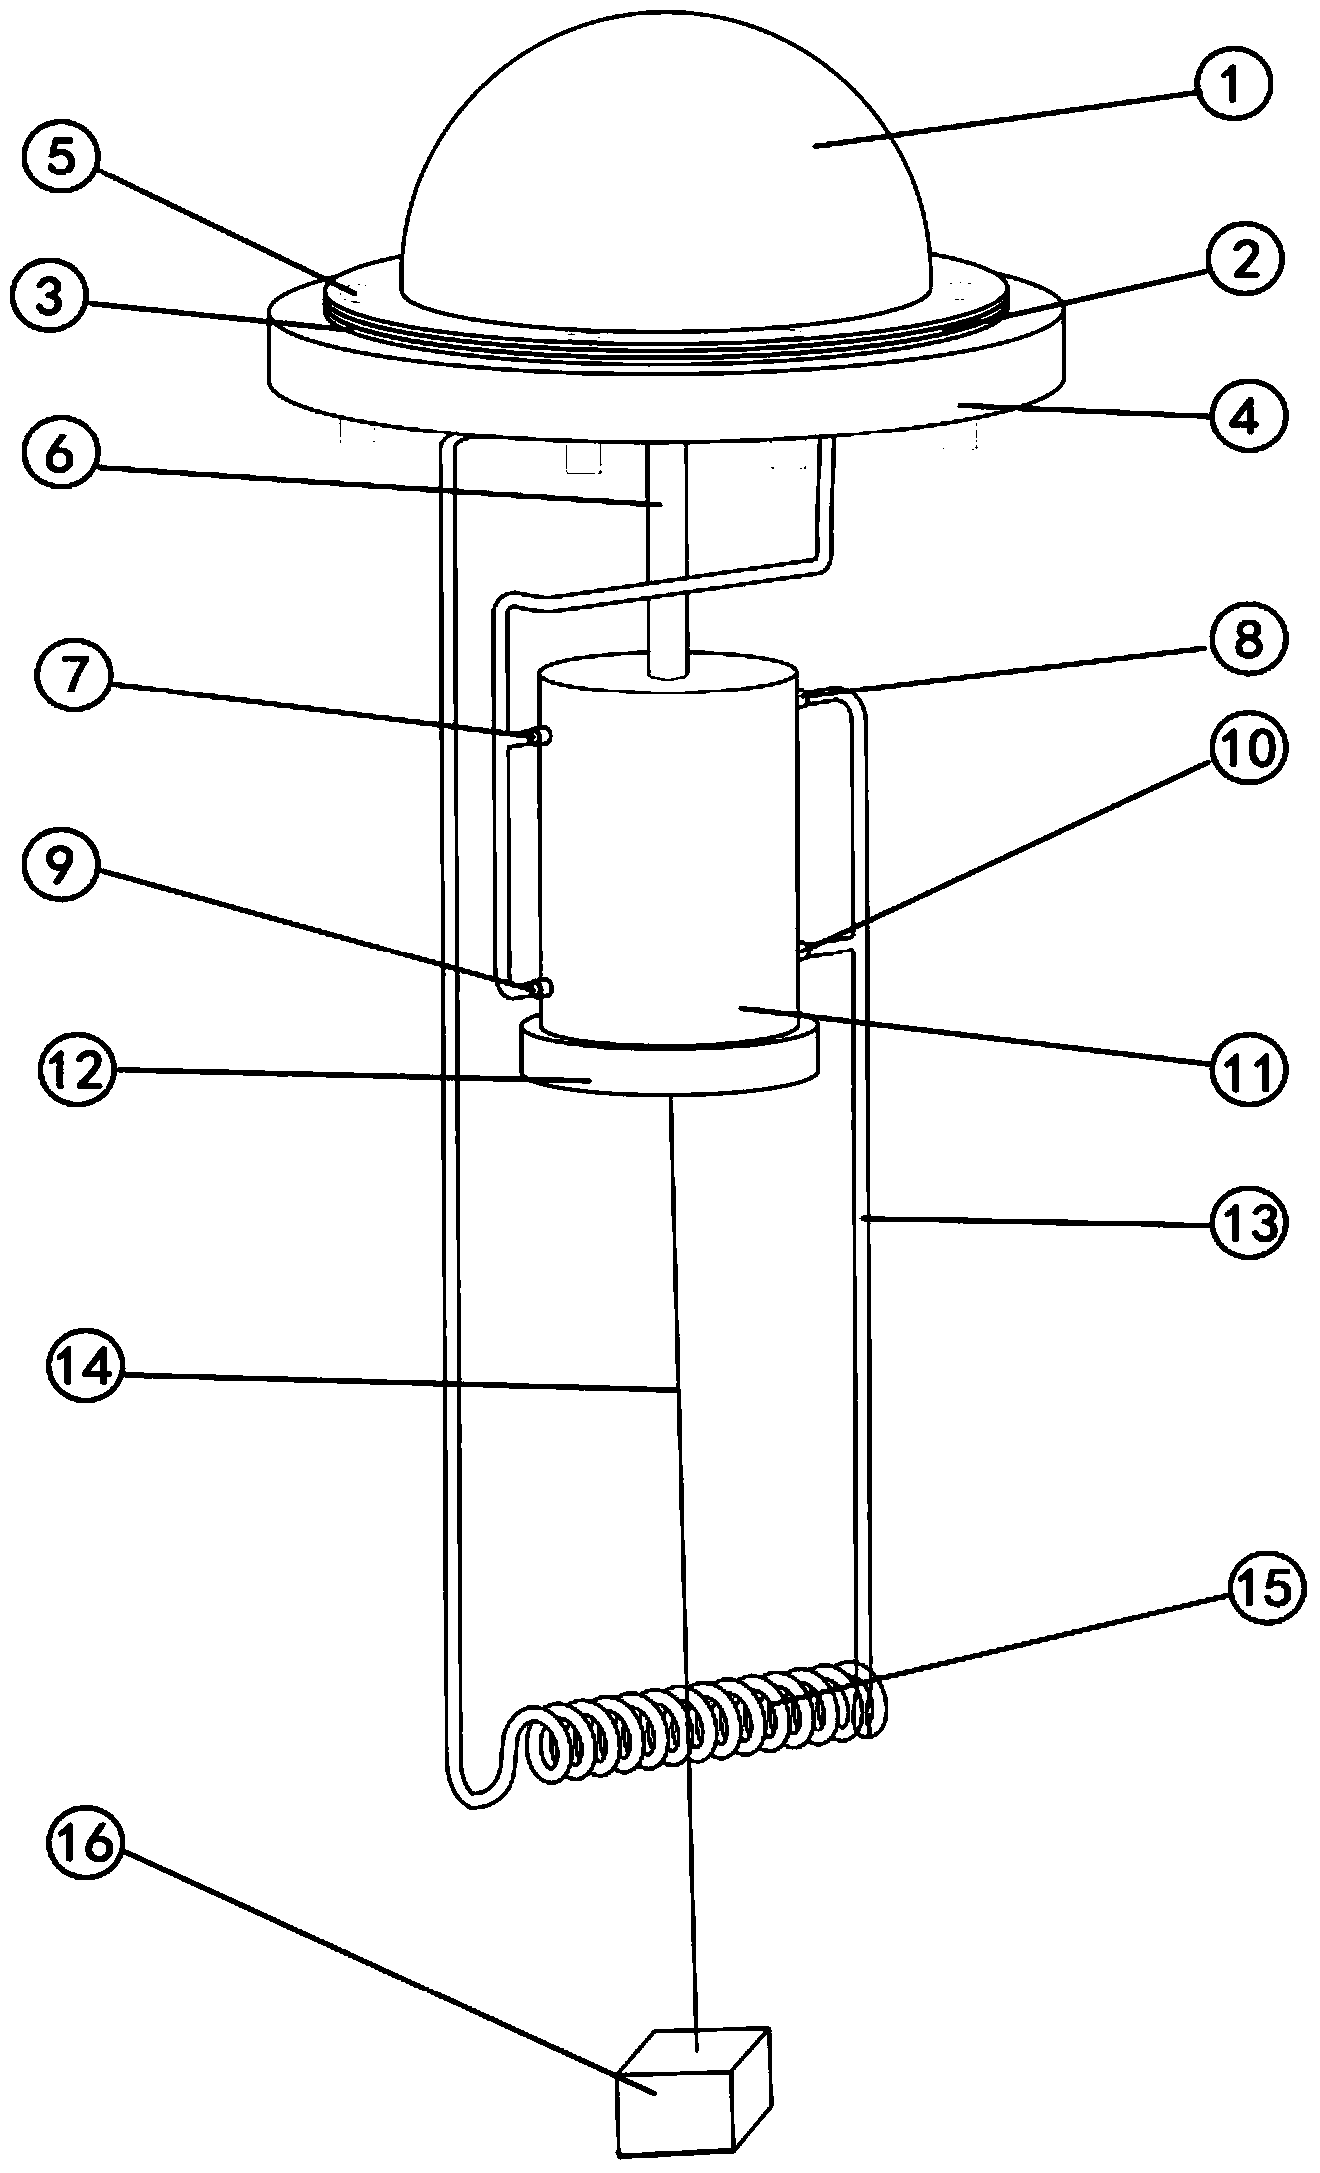 Device and method for lifting seabed nutritive salt in thermal differential mode